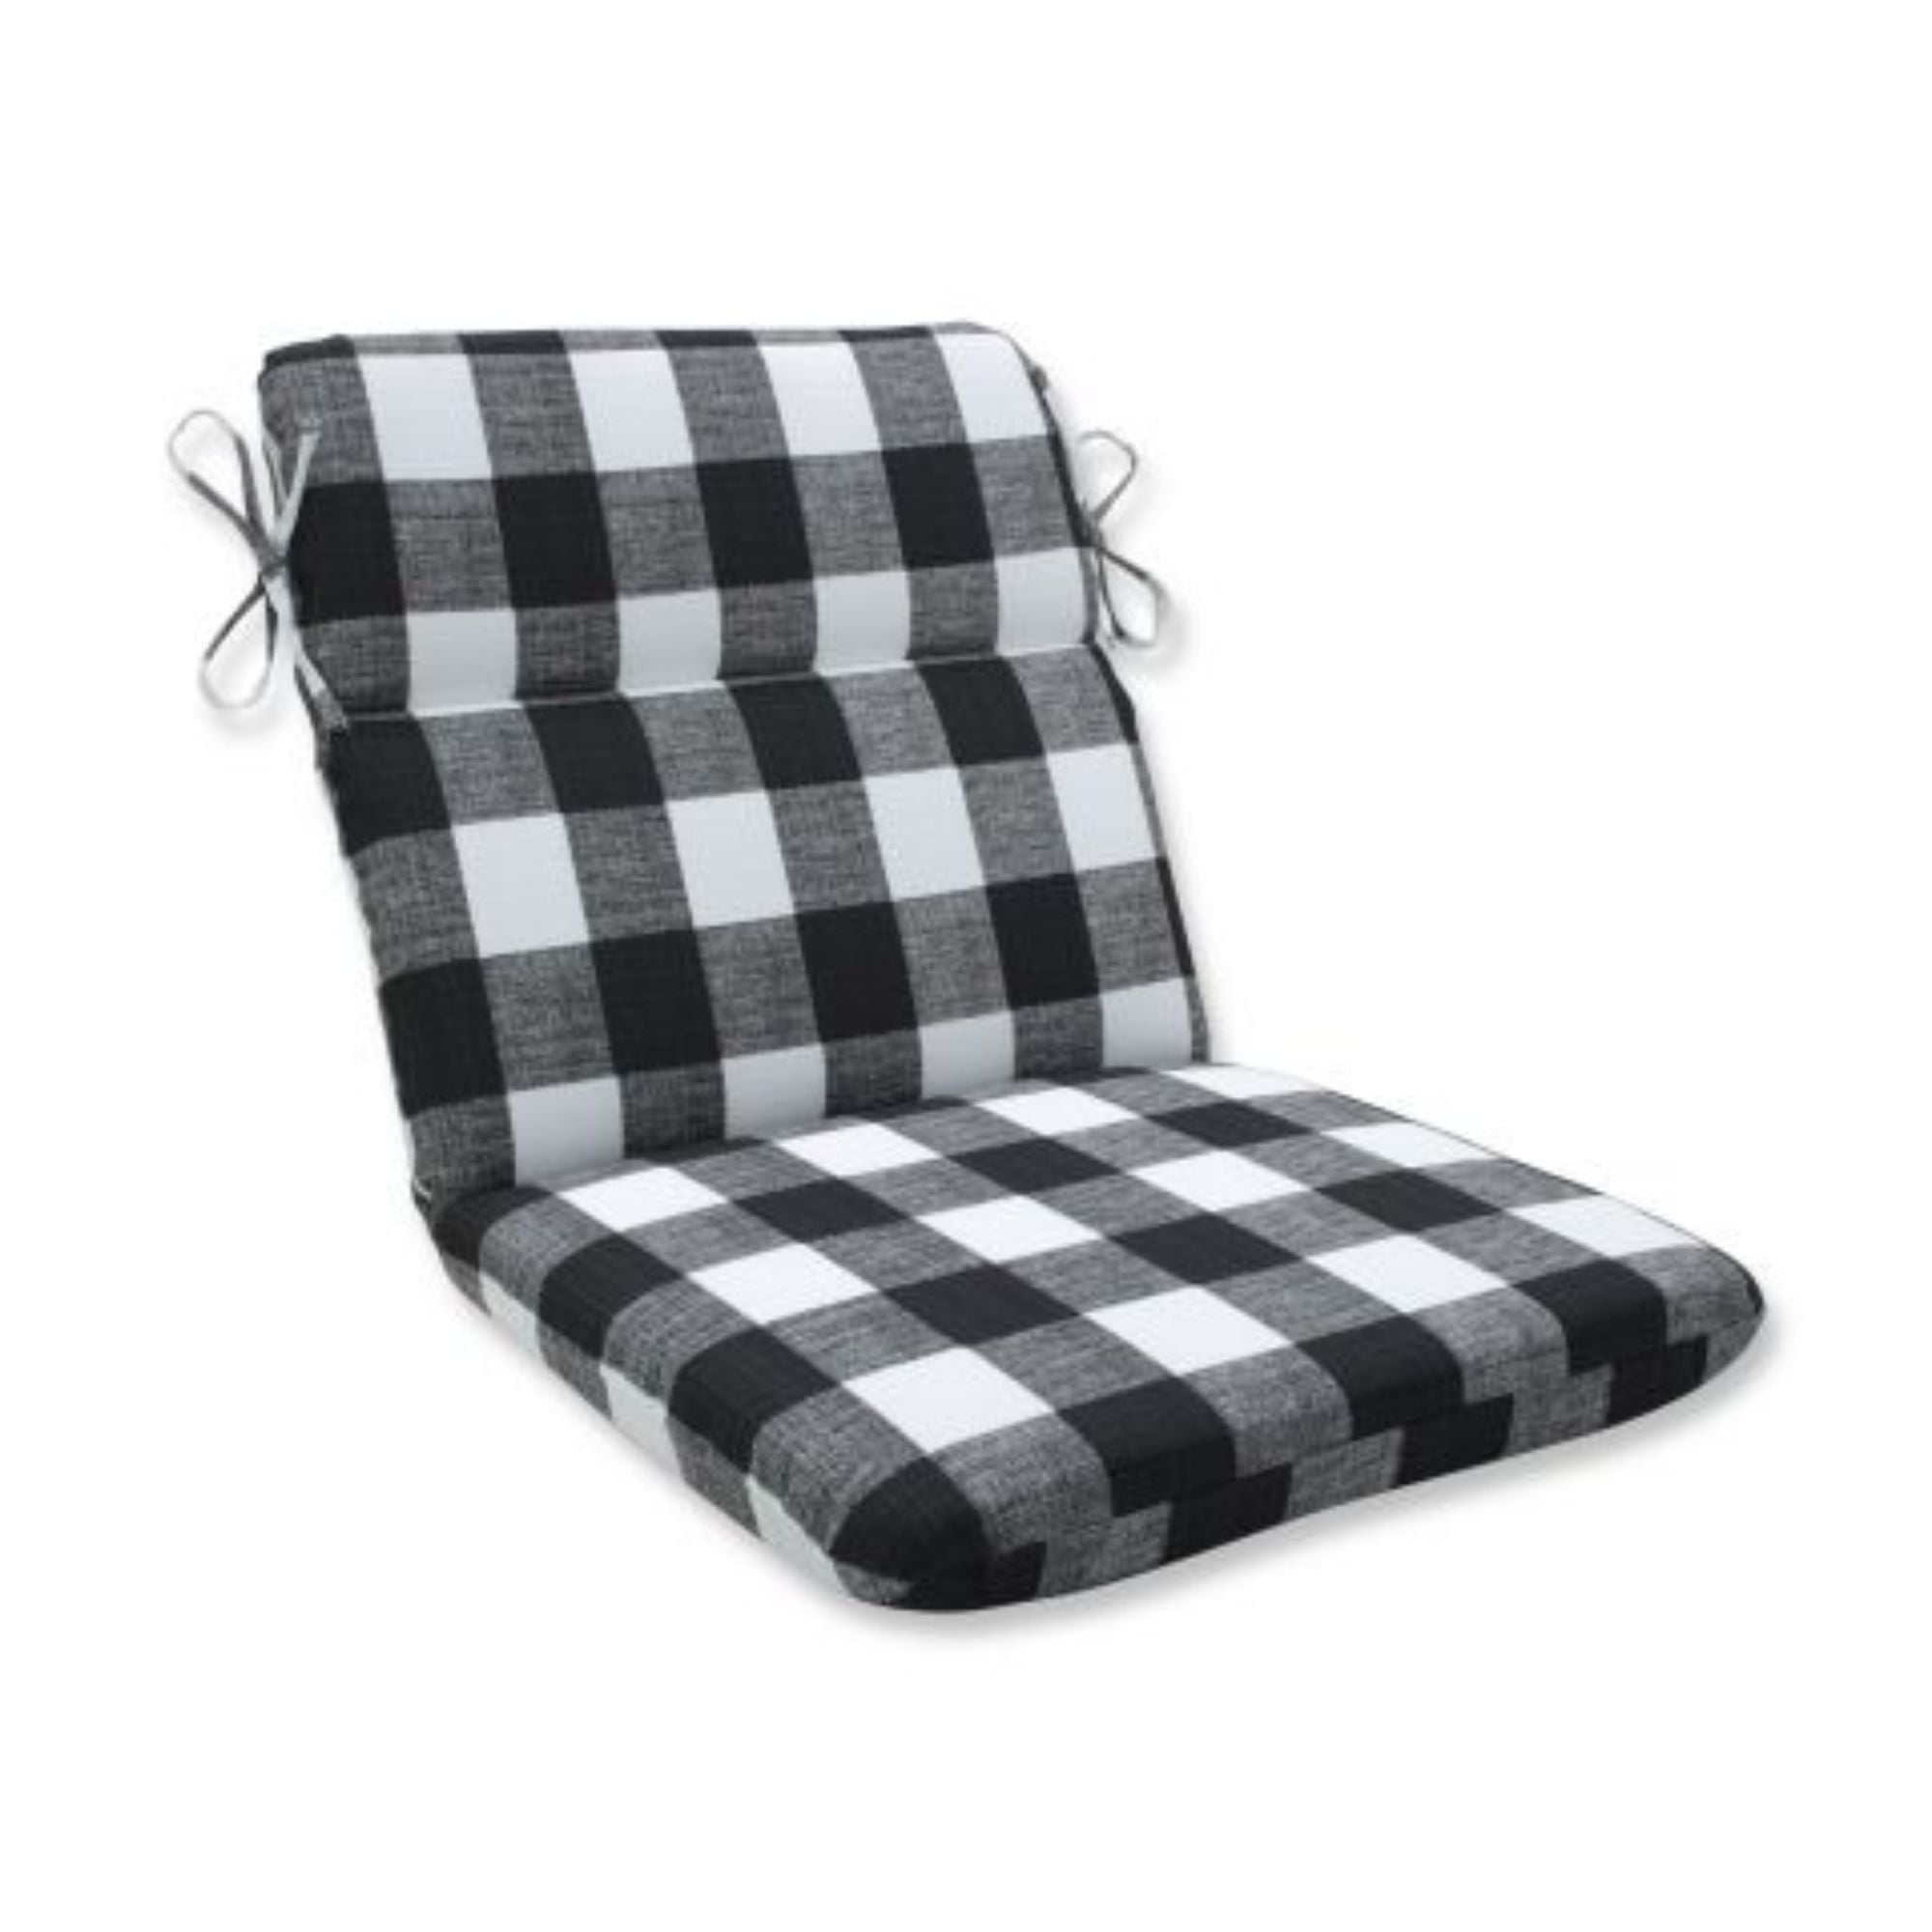 40.5" Black and White Plaid Outdoor Patio Rounded Corner